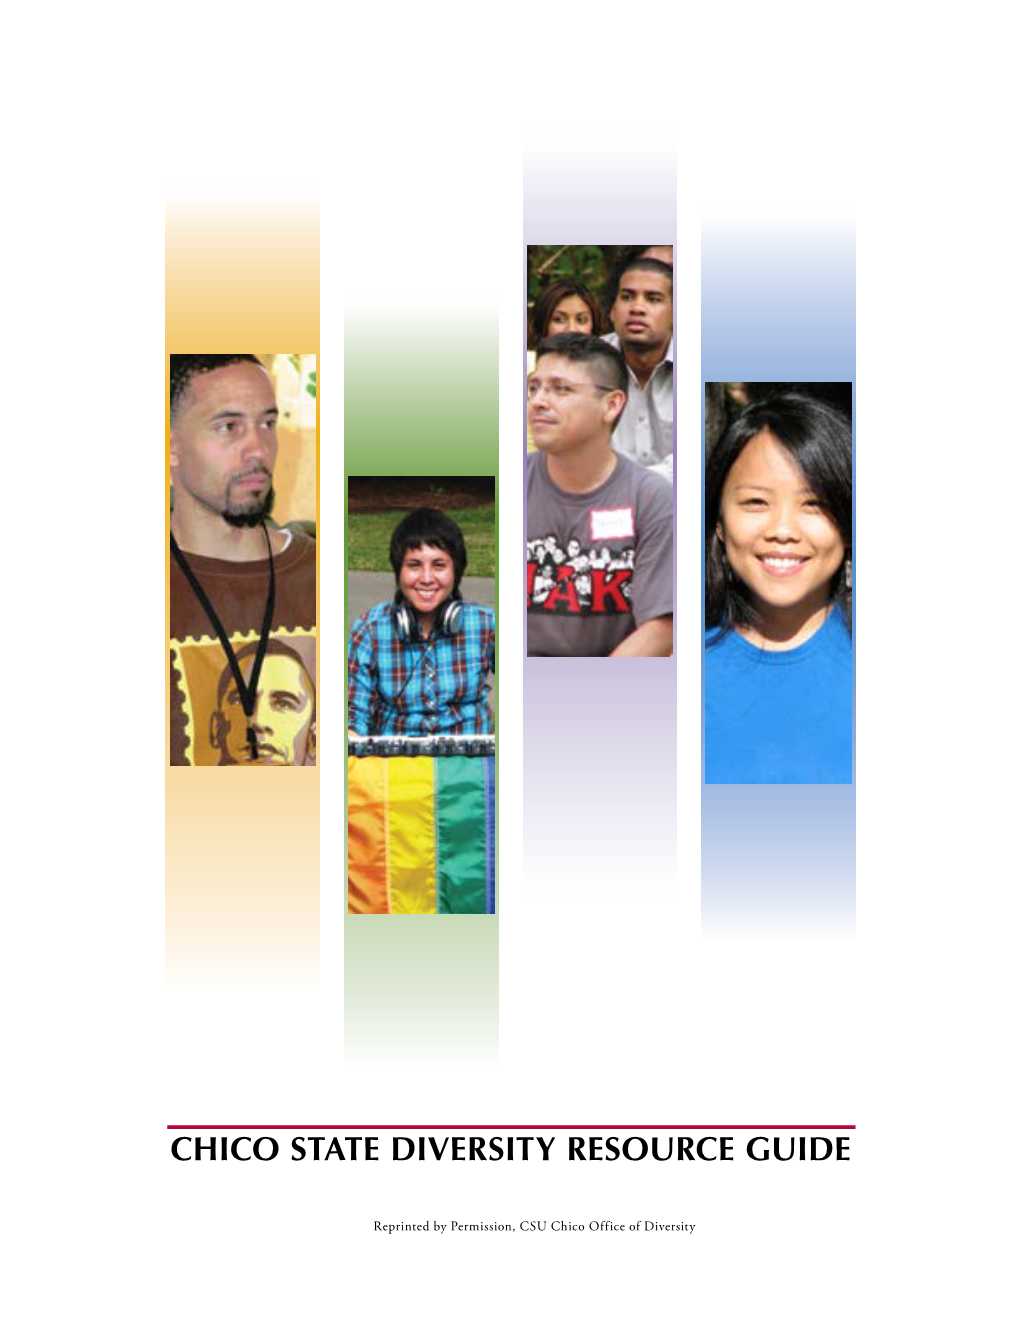 Chico State Diversity Resource Guide